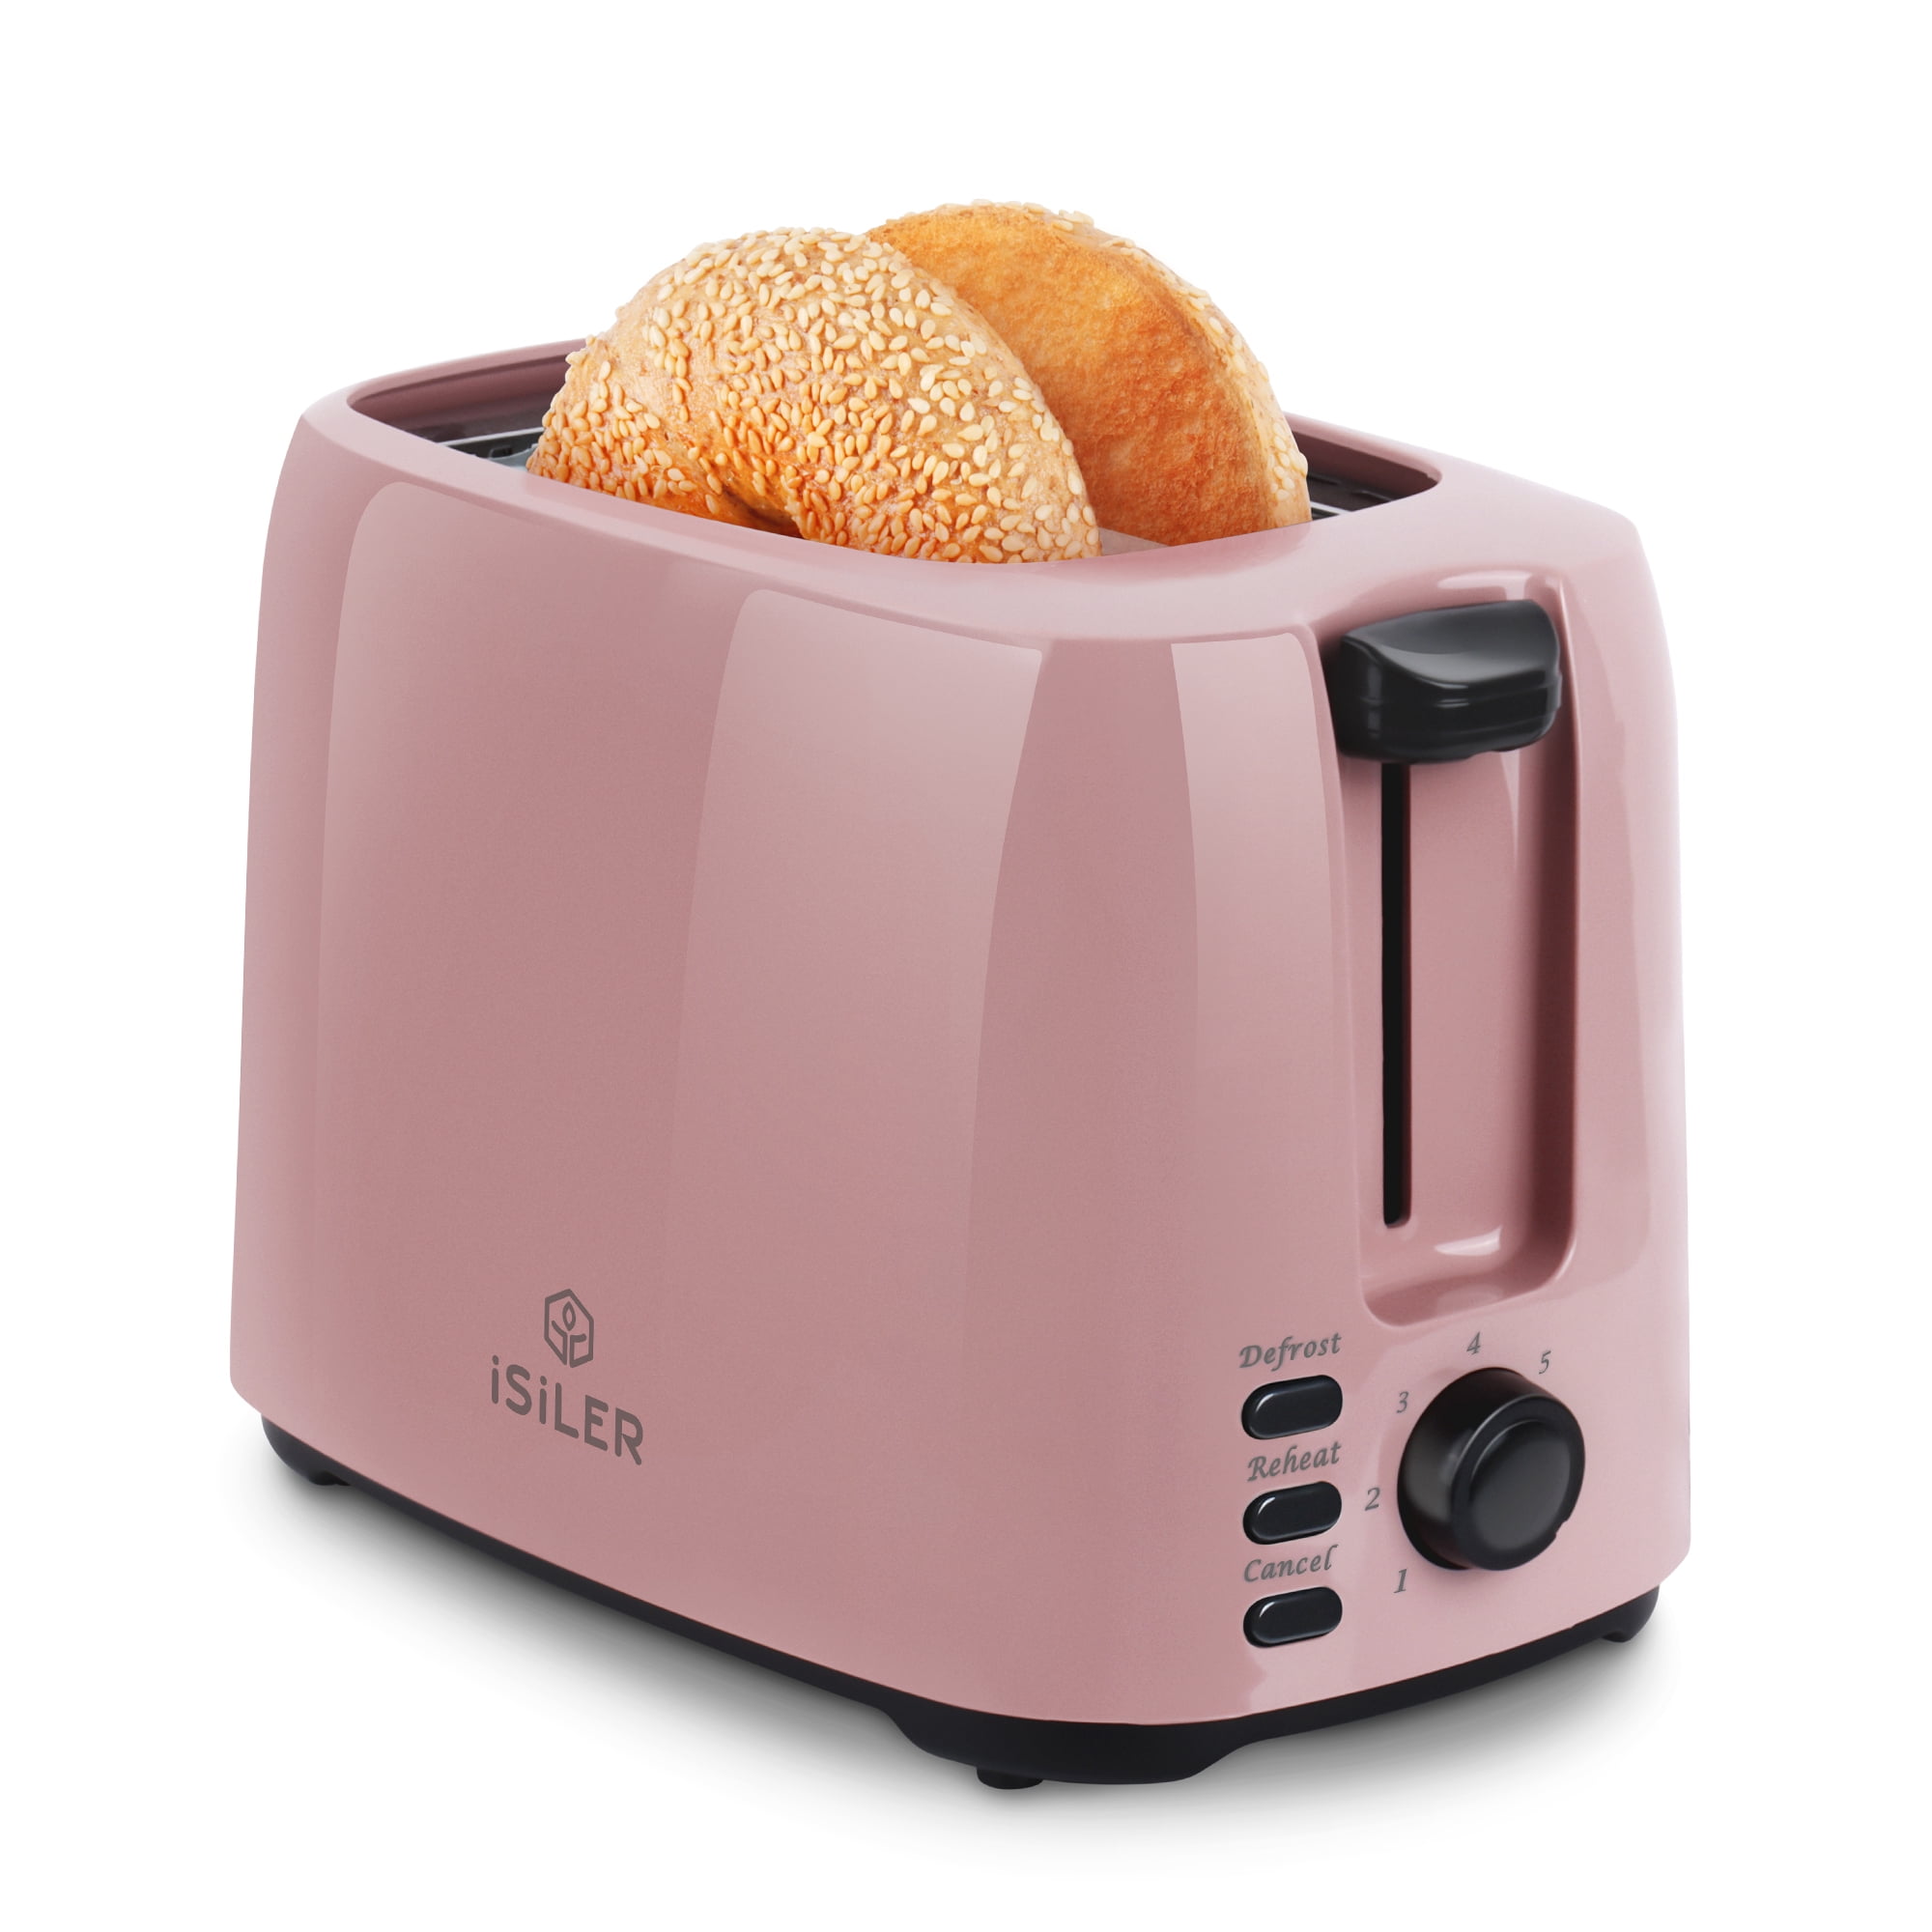 Mellerware Home Appliances - Enjoy crispy, fresh toast with the Mellerware  2 slice Vesta toaster. The Vesta 2 slice toaster has bread centering and  wide slots for thick or thin bread. Its